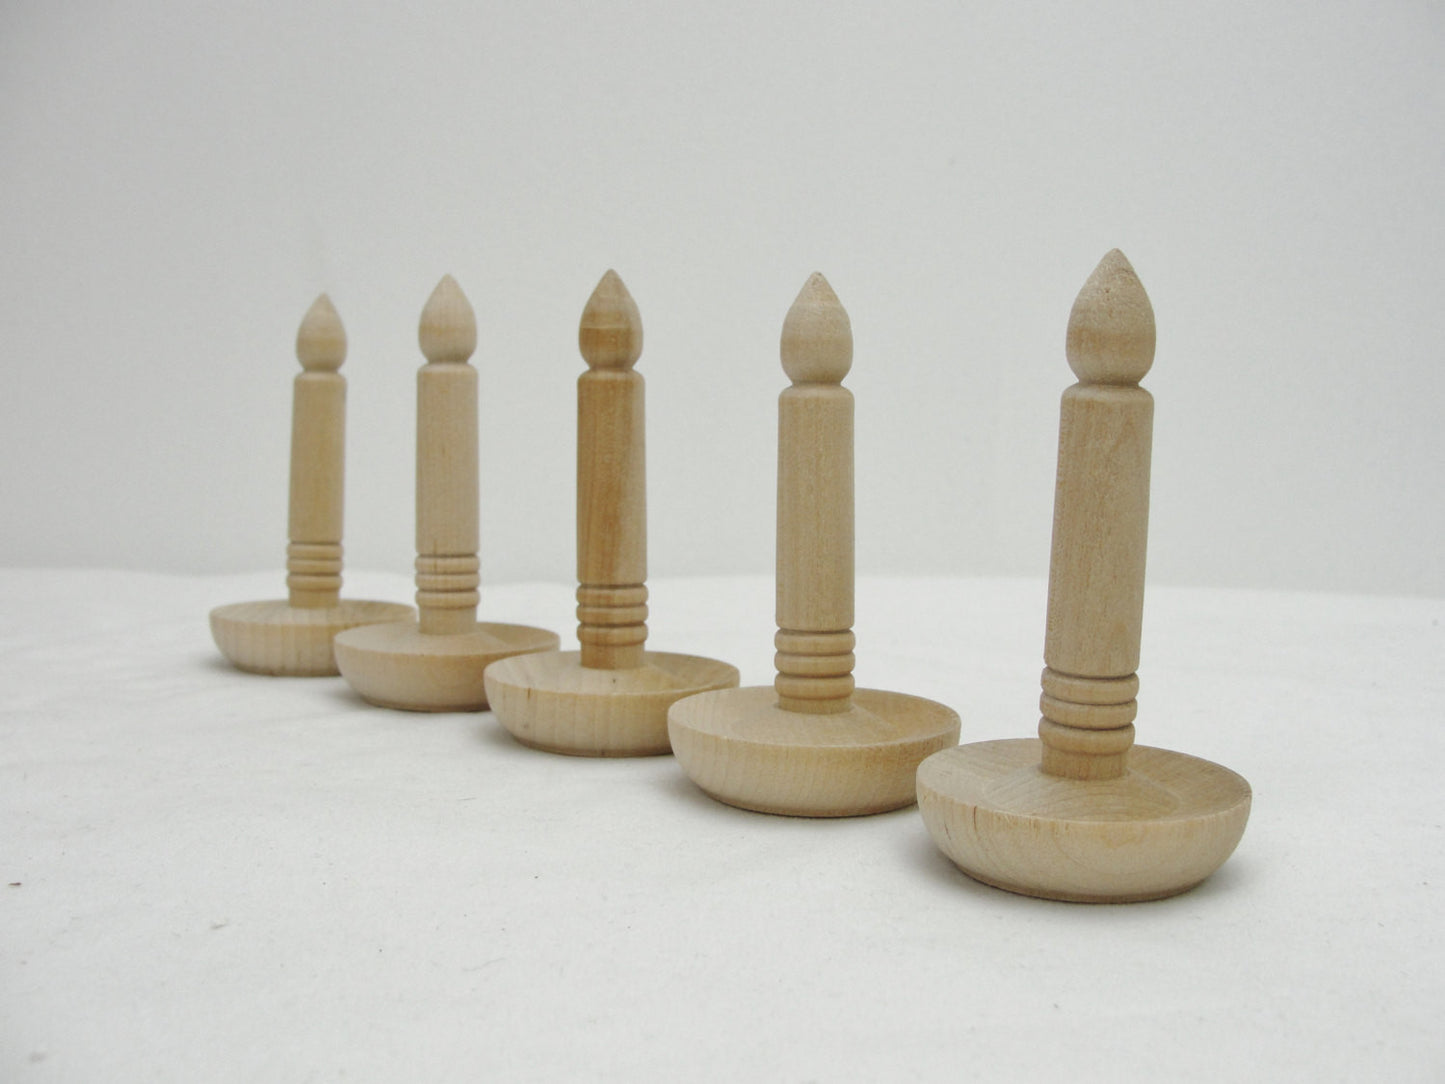 Wooden candle Christmas ornament set of 5 - Wood parts - Craft Supply House